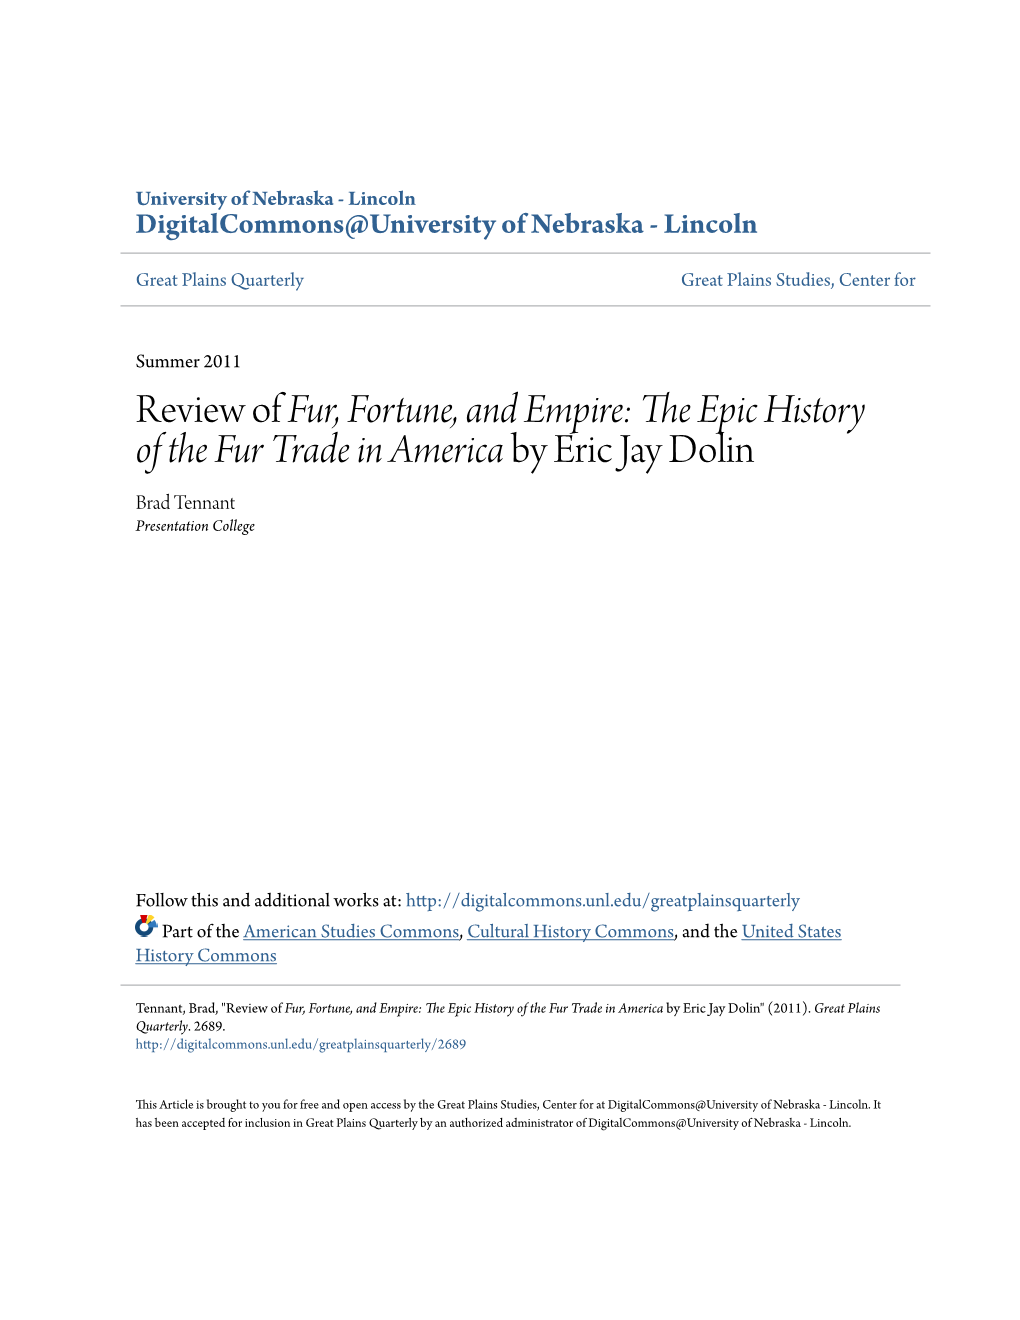 The Epic History of the Fur Trade in America by Eric Jay Dolin Brad Tennant Presentation College